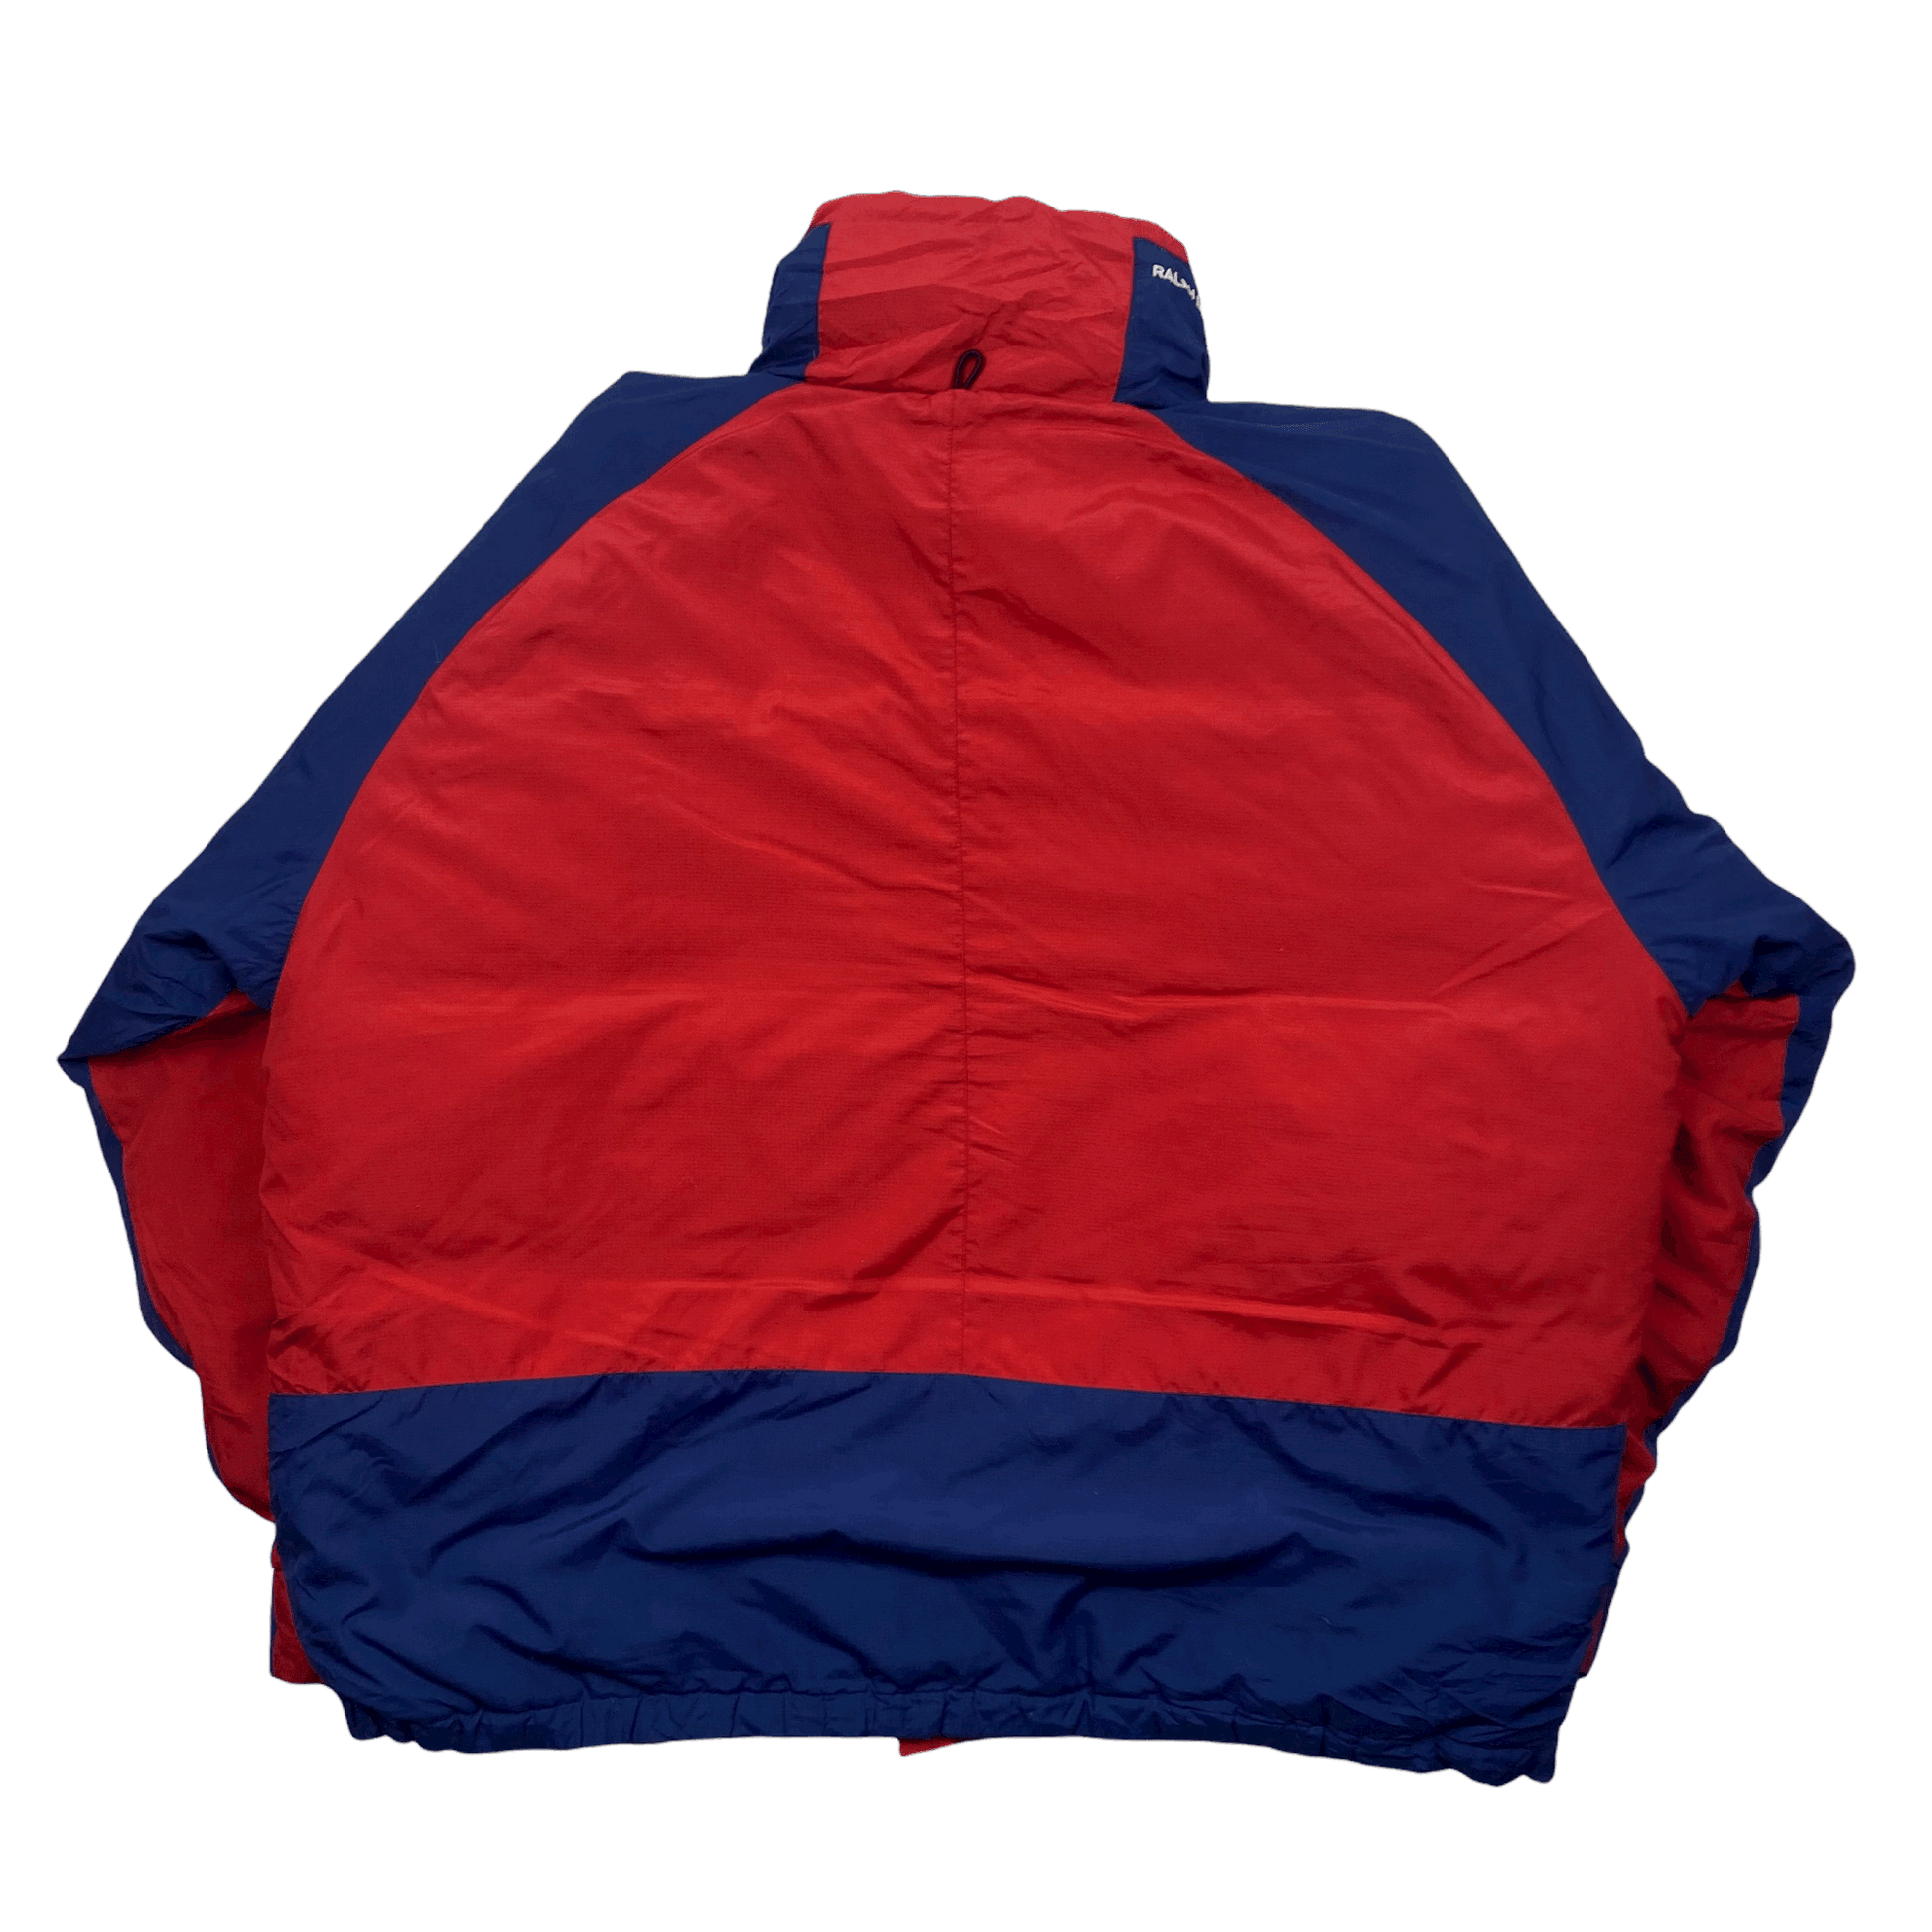 Vintage 90s Navy Blue + Red Ralph Lauren Polo Jeans Spell-Out Puffer Coat/ Jacket - Medium (Recommended Size - Large) - The Streetwear Studio